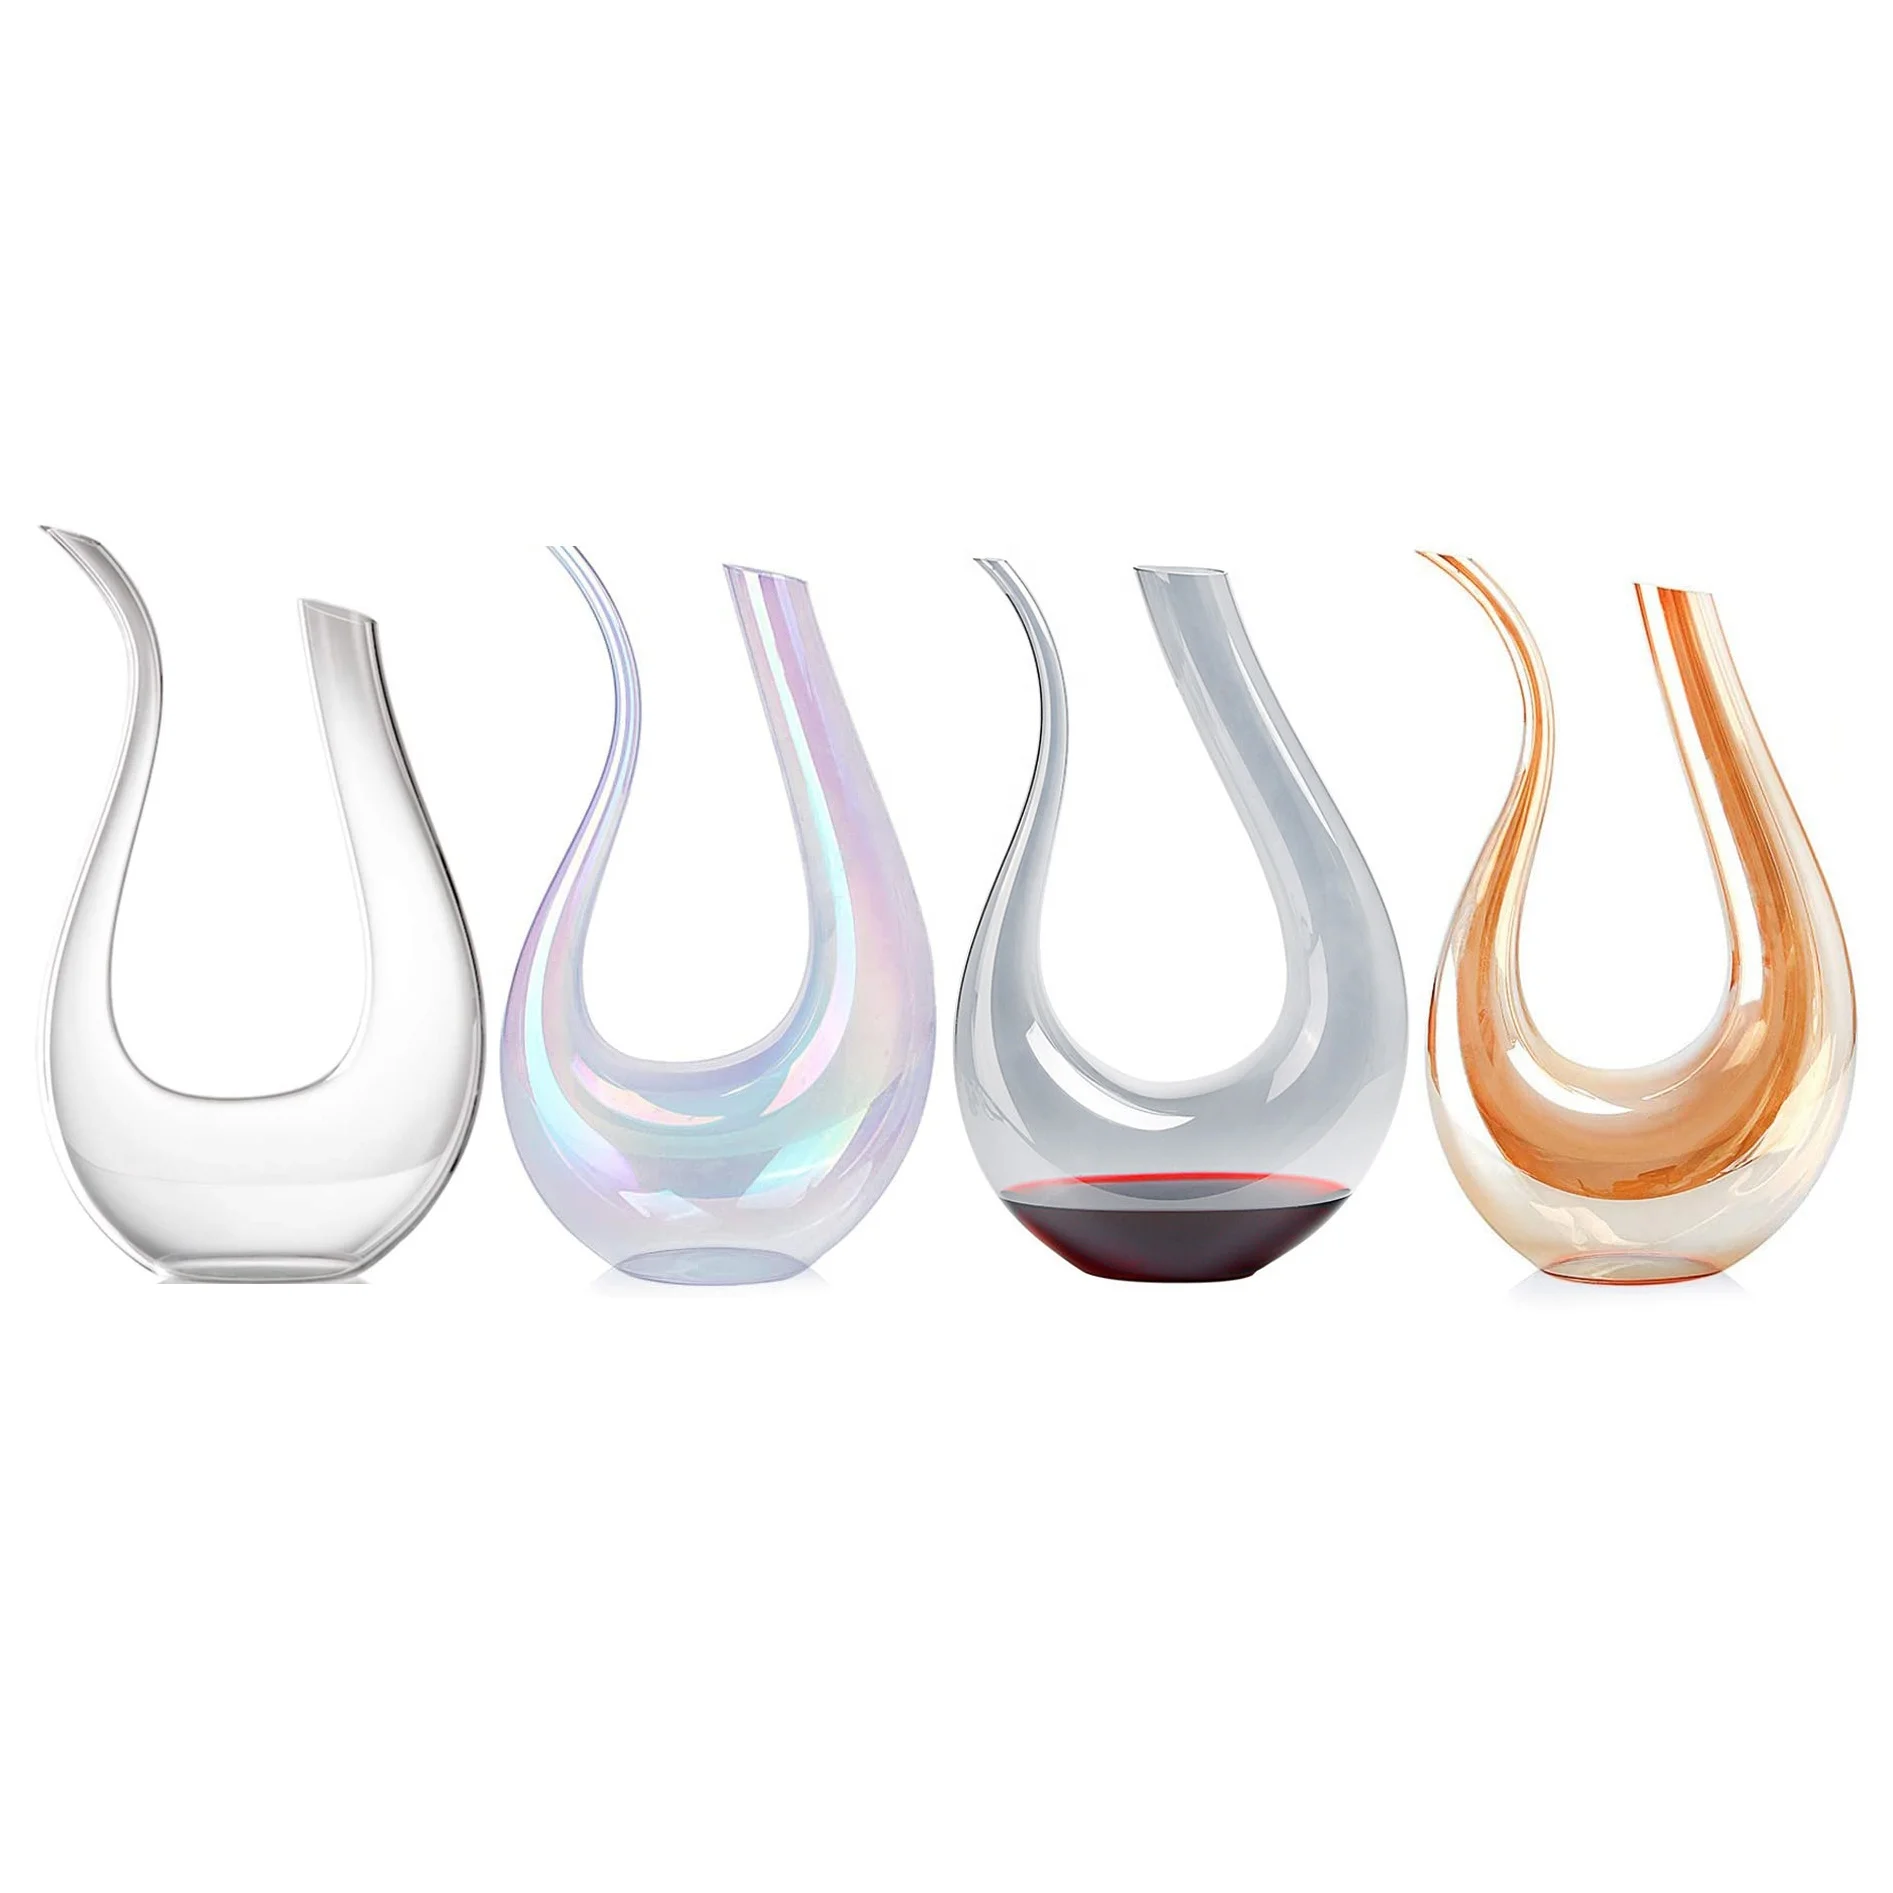 

2021 New Products Hand Mouth-blown Glass Wine Bottle Whisky Carafe U Shaped Decanter, Clear, grey, amber, rainbow